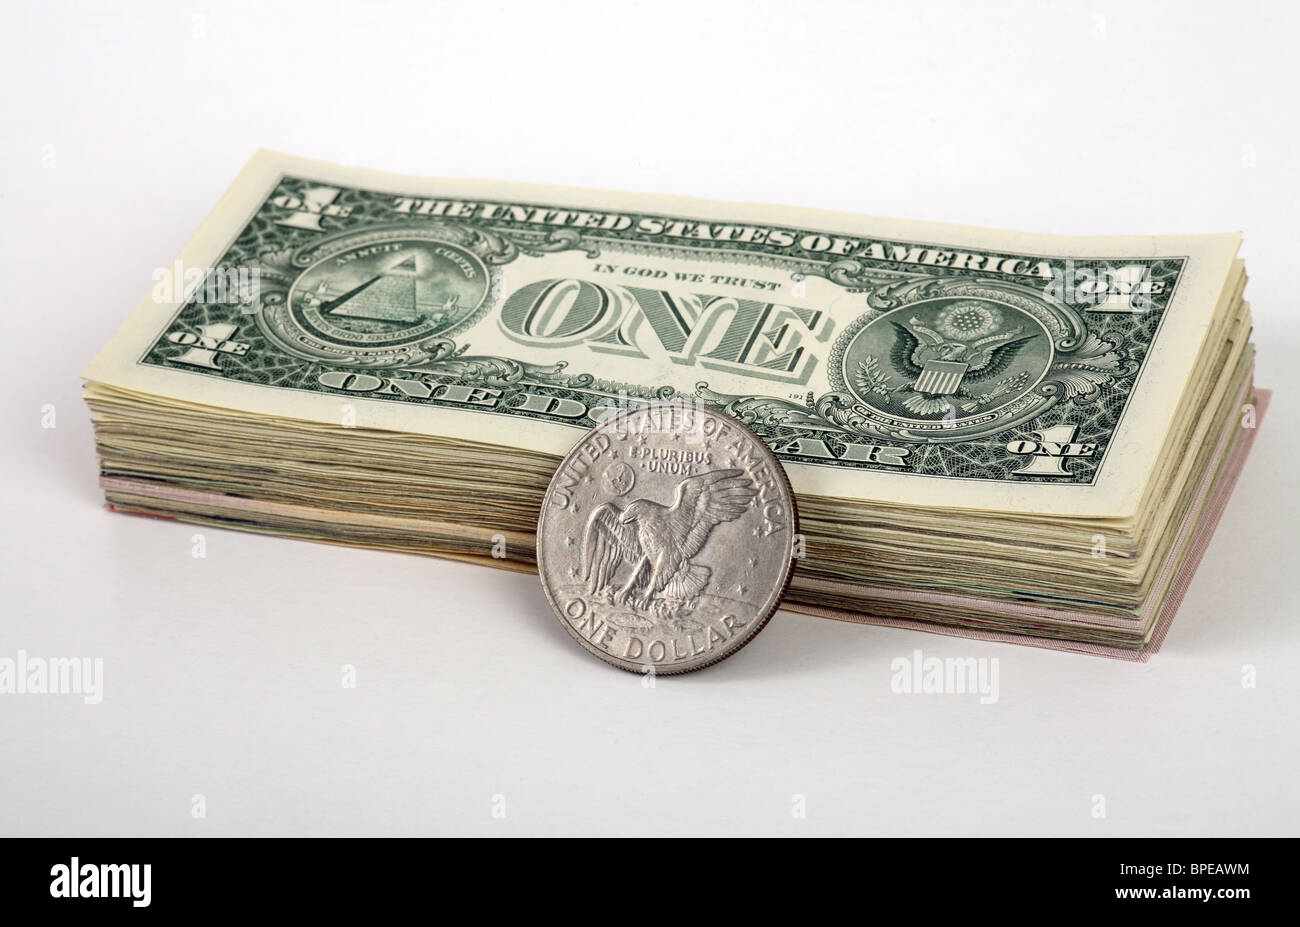 A wad of 1-dollar banknotes and a dollar coin Stock Photo